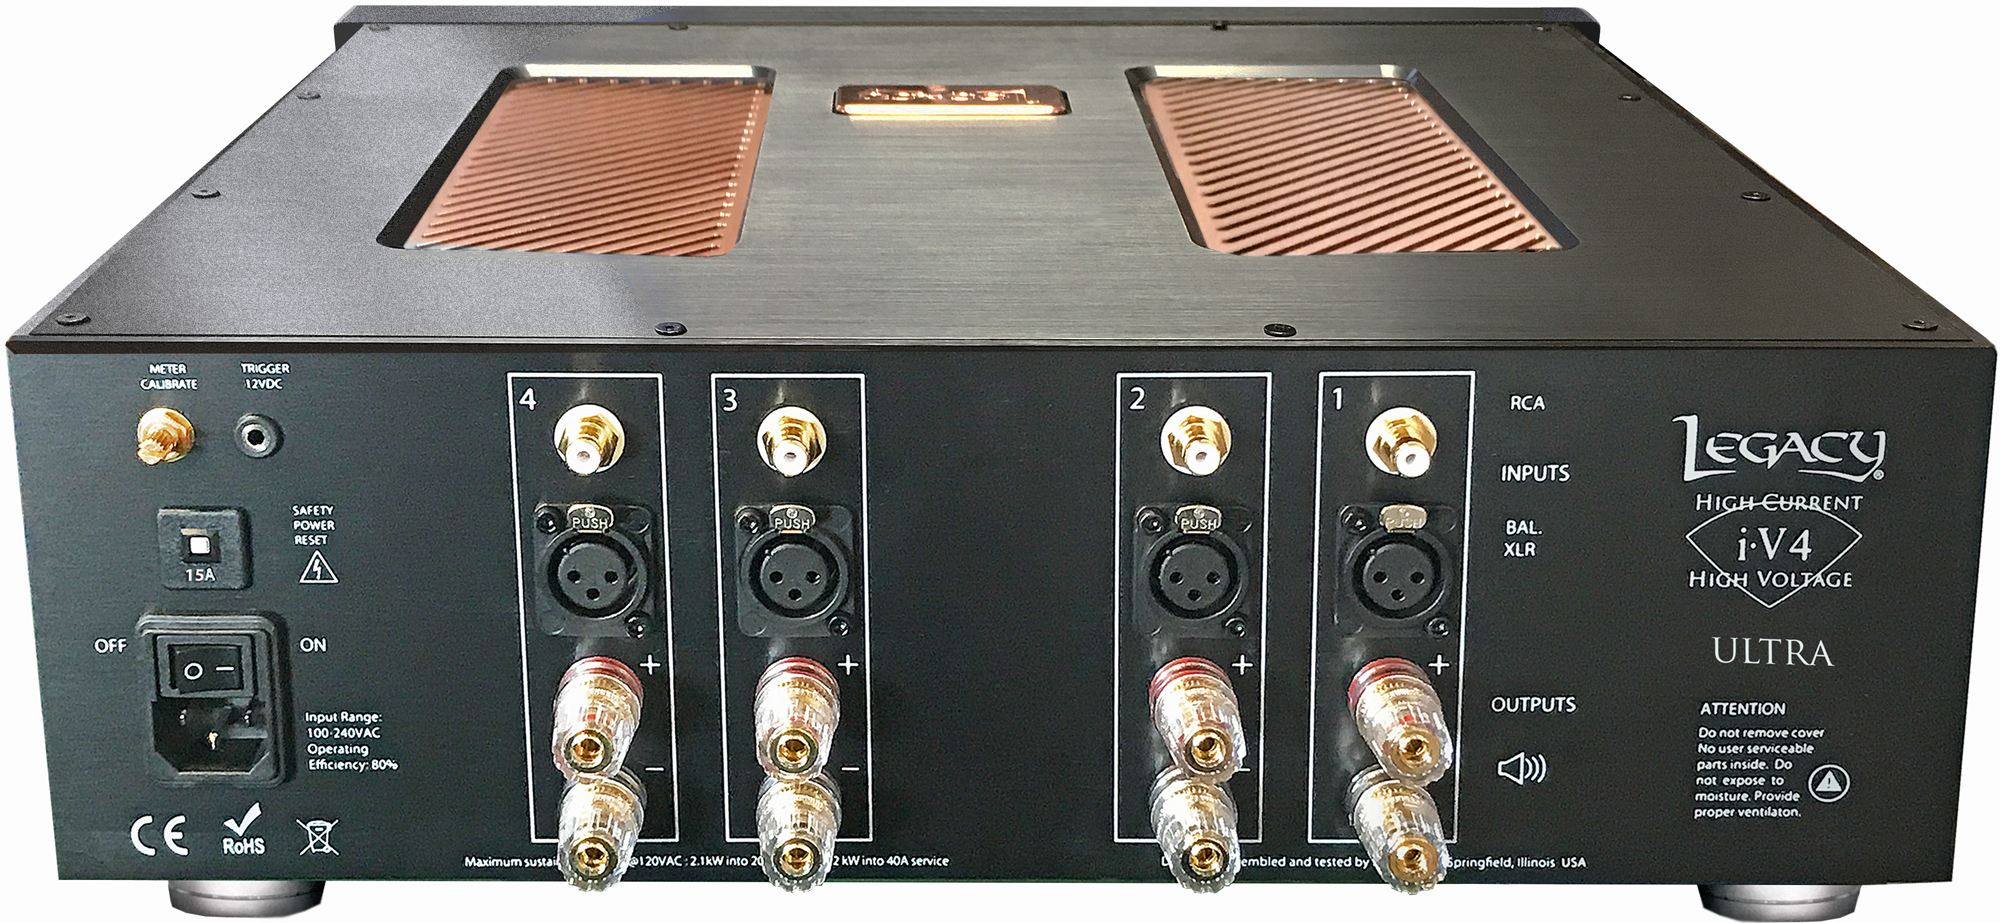 legacy amplifier review